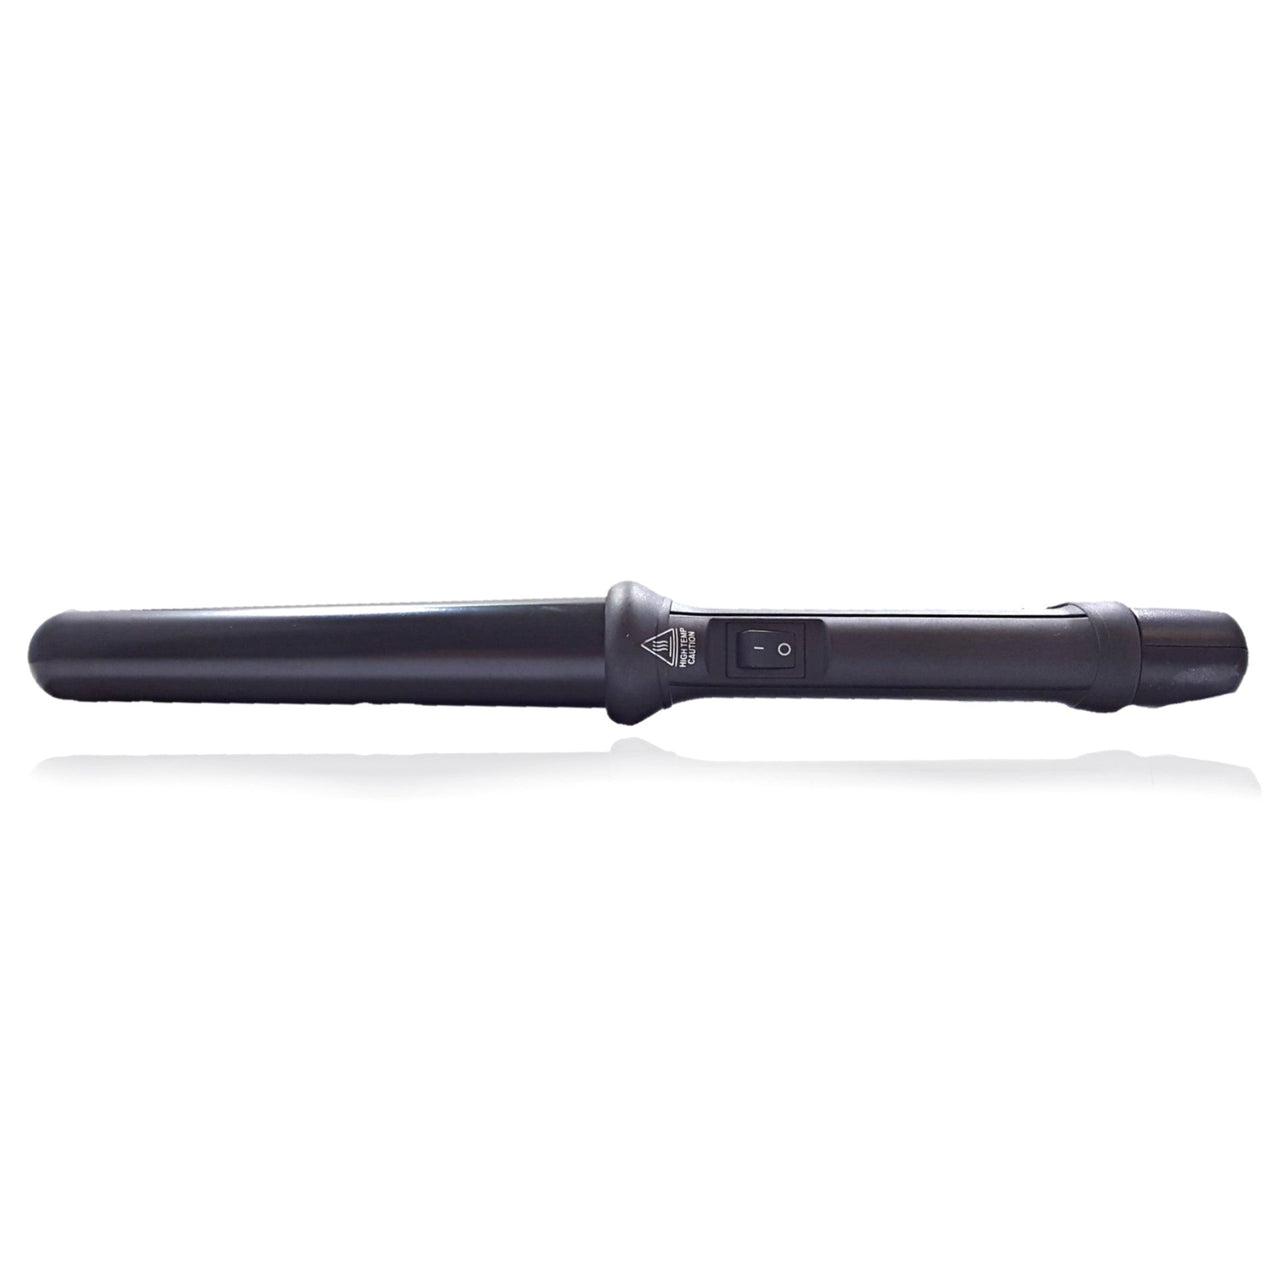 32-25mm Tapered Tourmaline Ceramic Curling Iron Clipless Hair Twister with Protective Glove Black